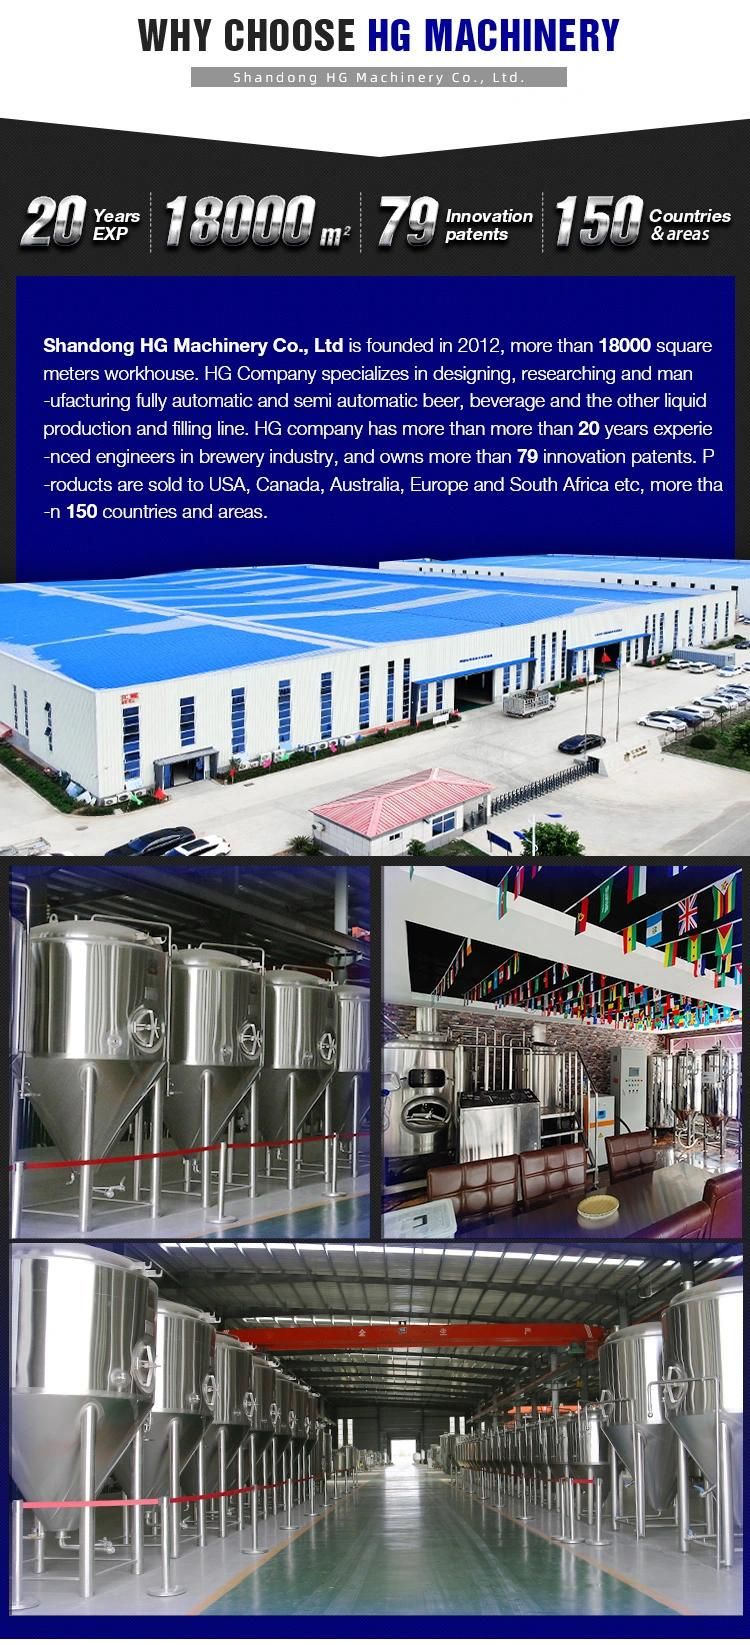 Complete 1000 Litre 2000L Brewhouse Brewery Beer Making Machine Industrial Brewing Equipment